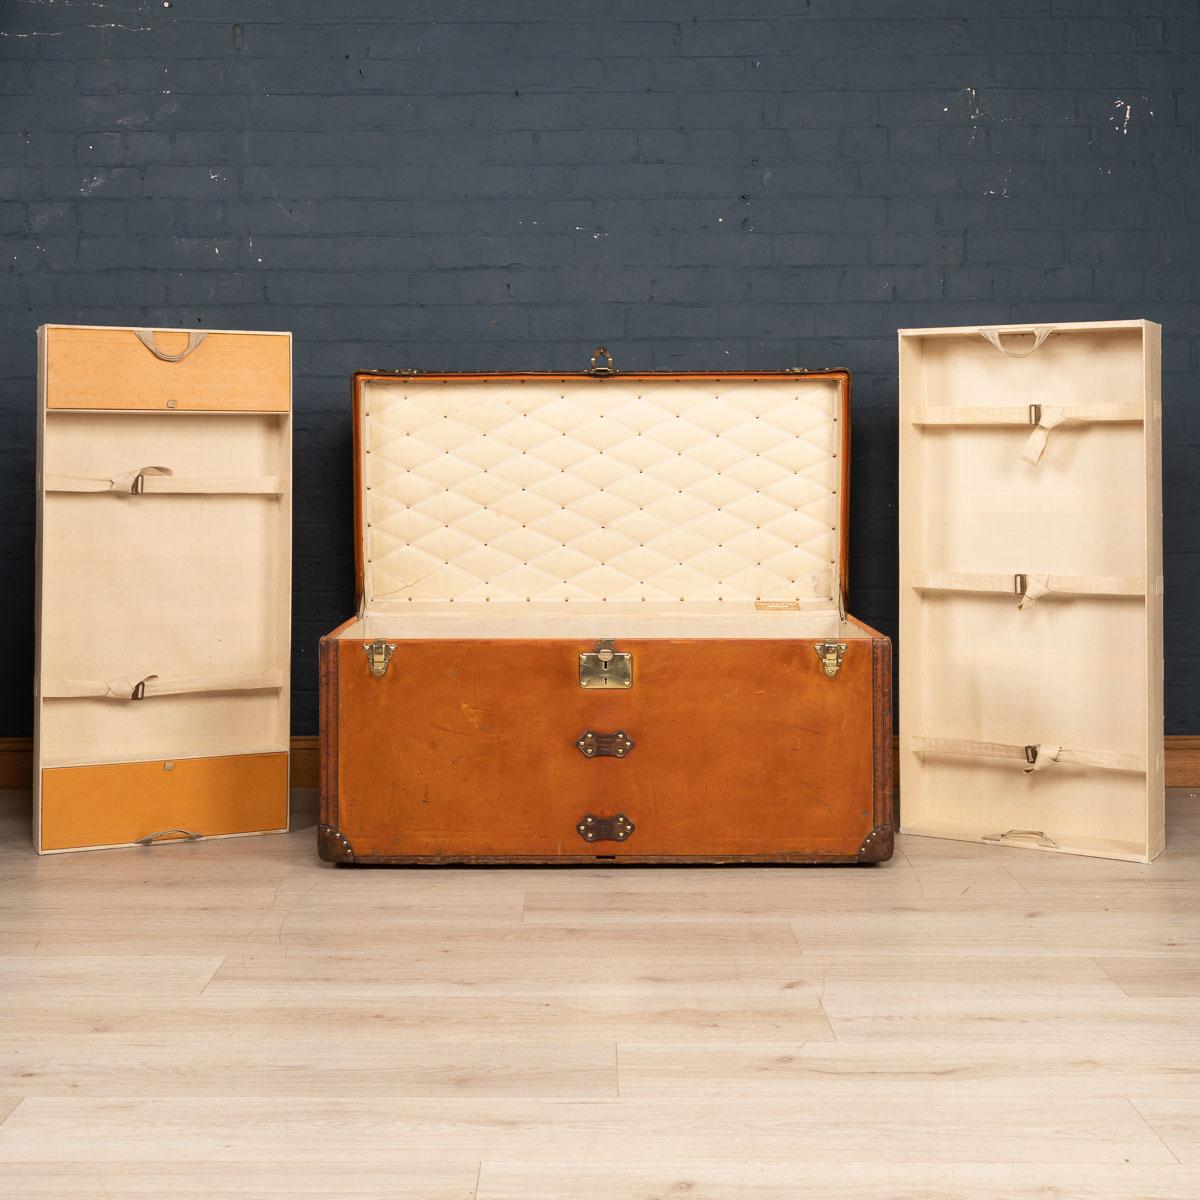 A very rare wardrobe trunk by Louis Vuitton dating to the early part of the 20th century, (circa 1900/1910). Covered in the famous orange “Vuittonite“ canvas, this horizontal courier trunk is much rarer than its monogrammed brothers with its stain